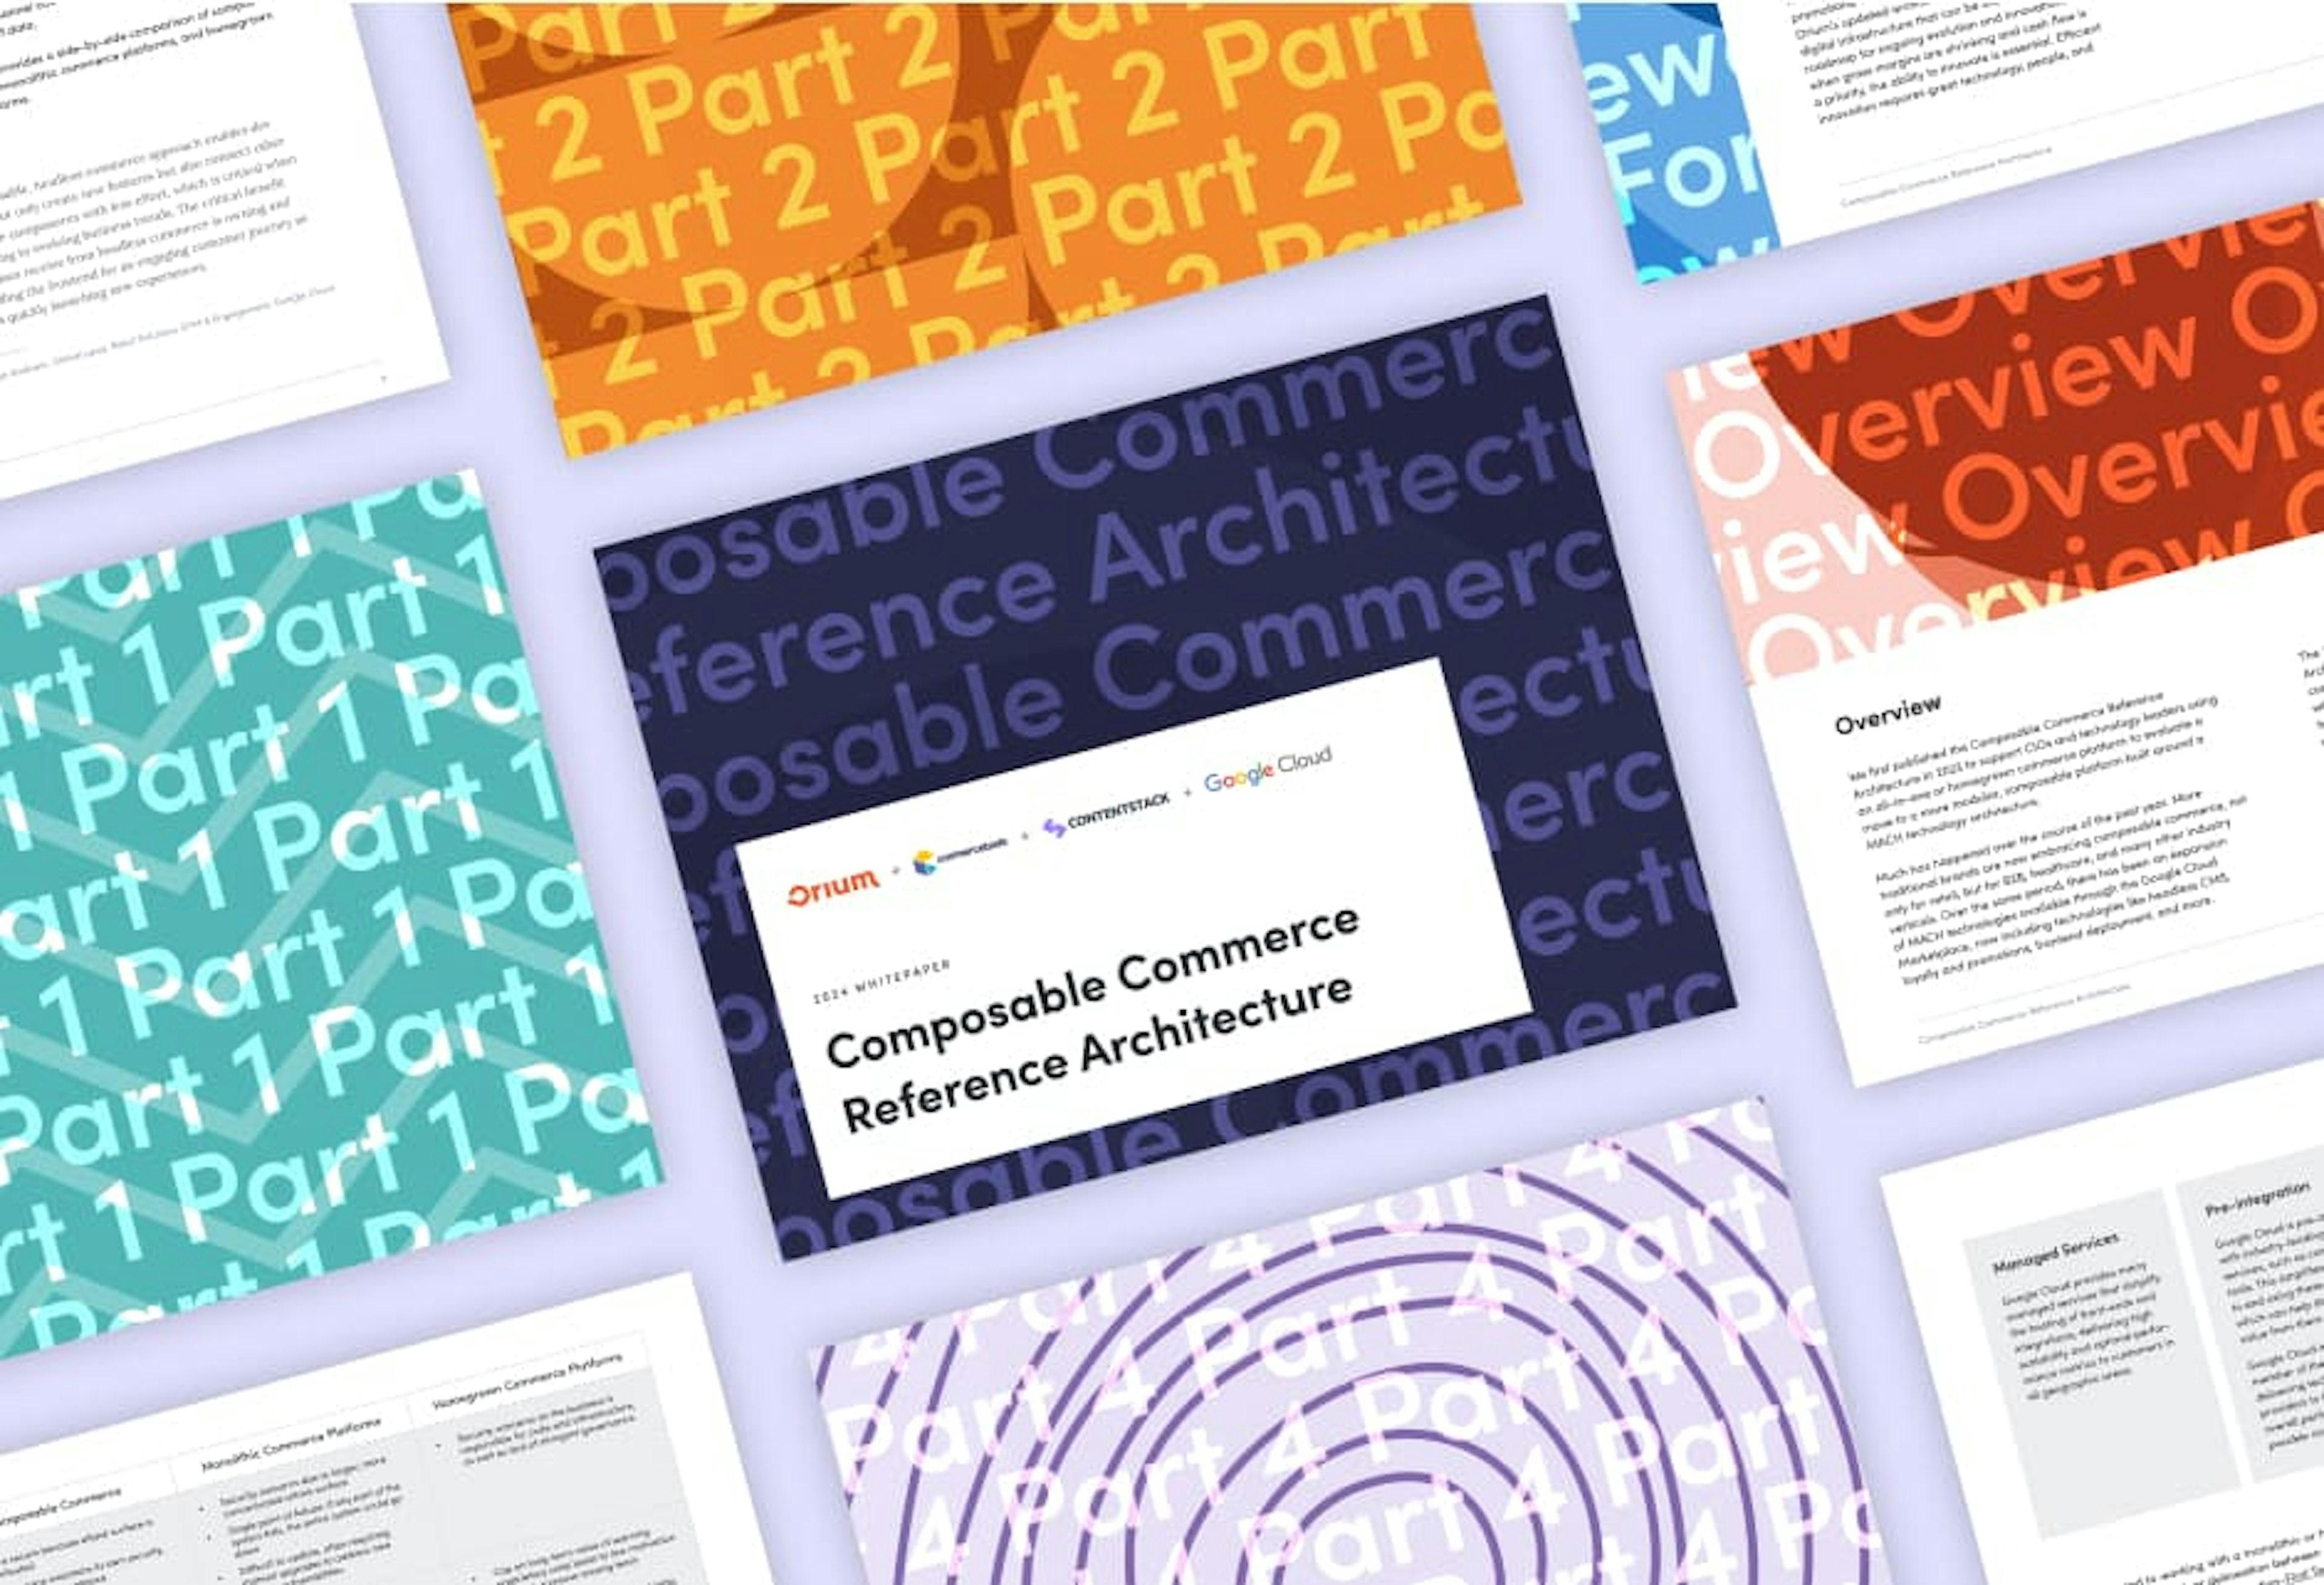 Multiple pages from the Composable Commerce Reference Architecture whitepaper, on a light purple background arranged in a diagonal tiled pattern.